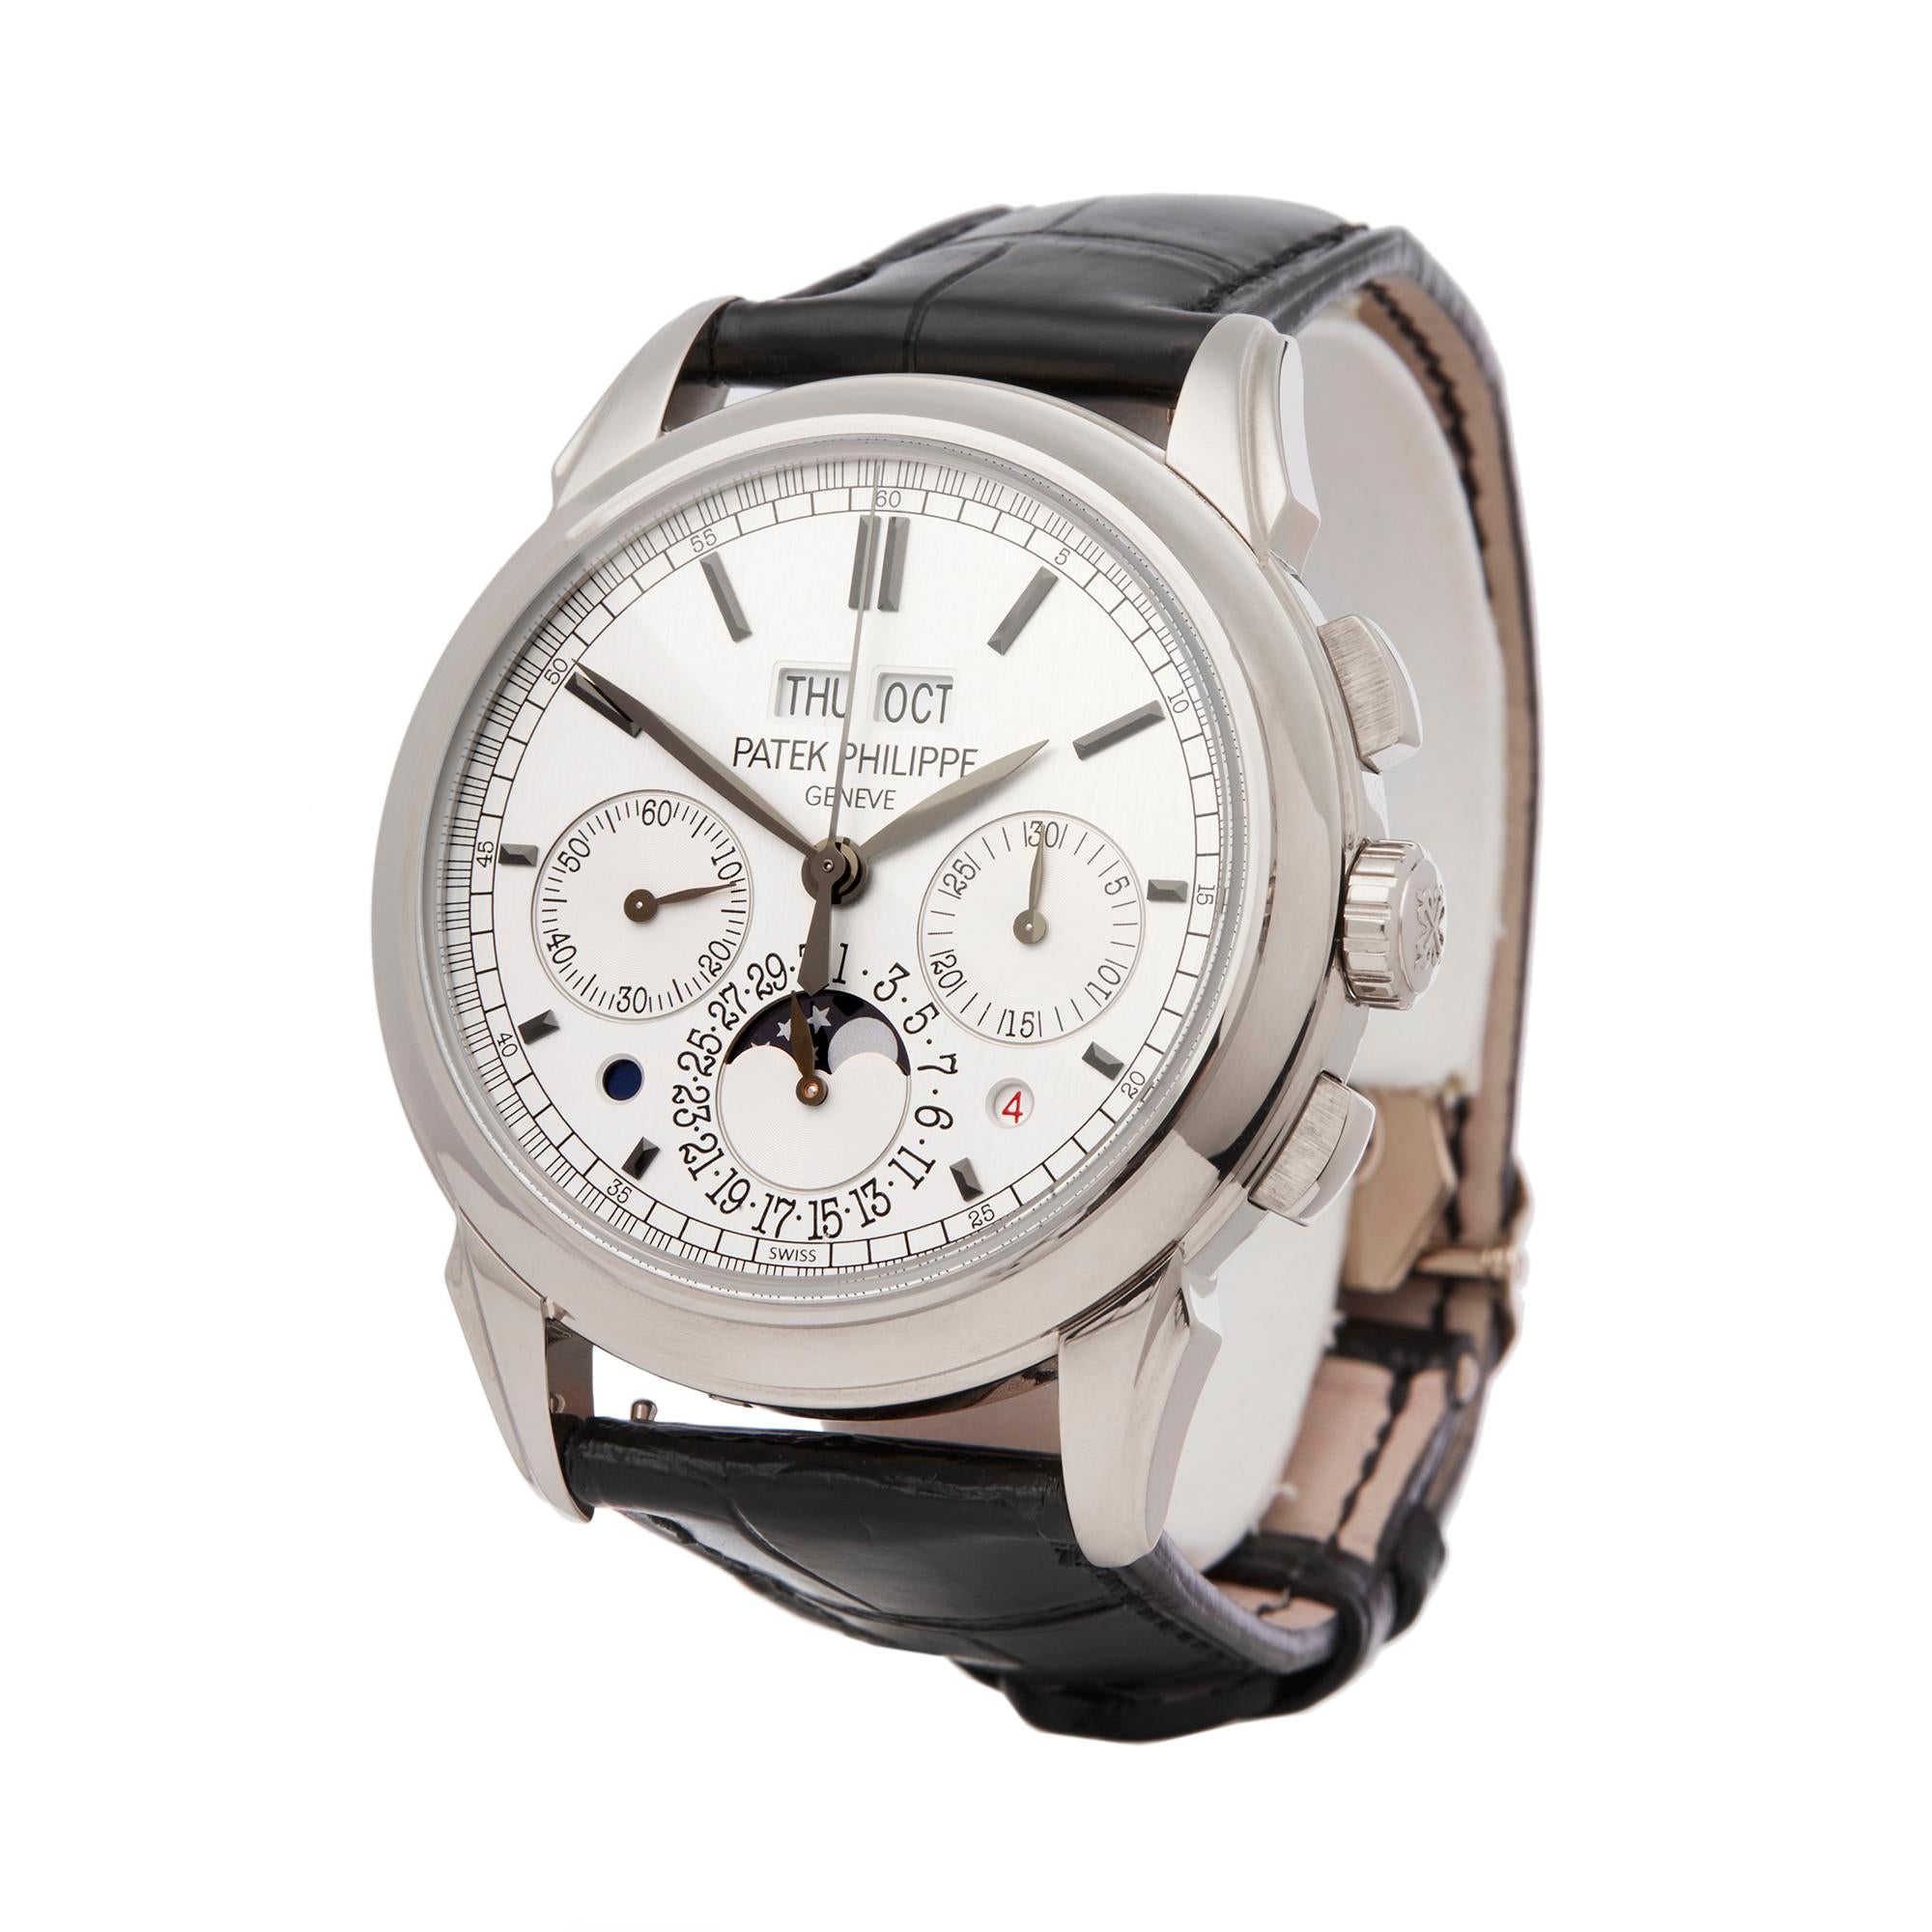 Reference: COM2087
Manufacturer: Patek Philippe
Model: Perpetual Calendar
Model Reference: 5270G-001
Age: 24th November 2011
Gender: Men's
Box and Papers: Box, Manuals and Guarantee
Dial: Silver Baton
Glass: Sapphire Crystal
Mechanical